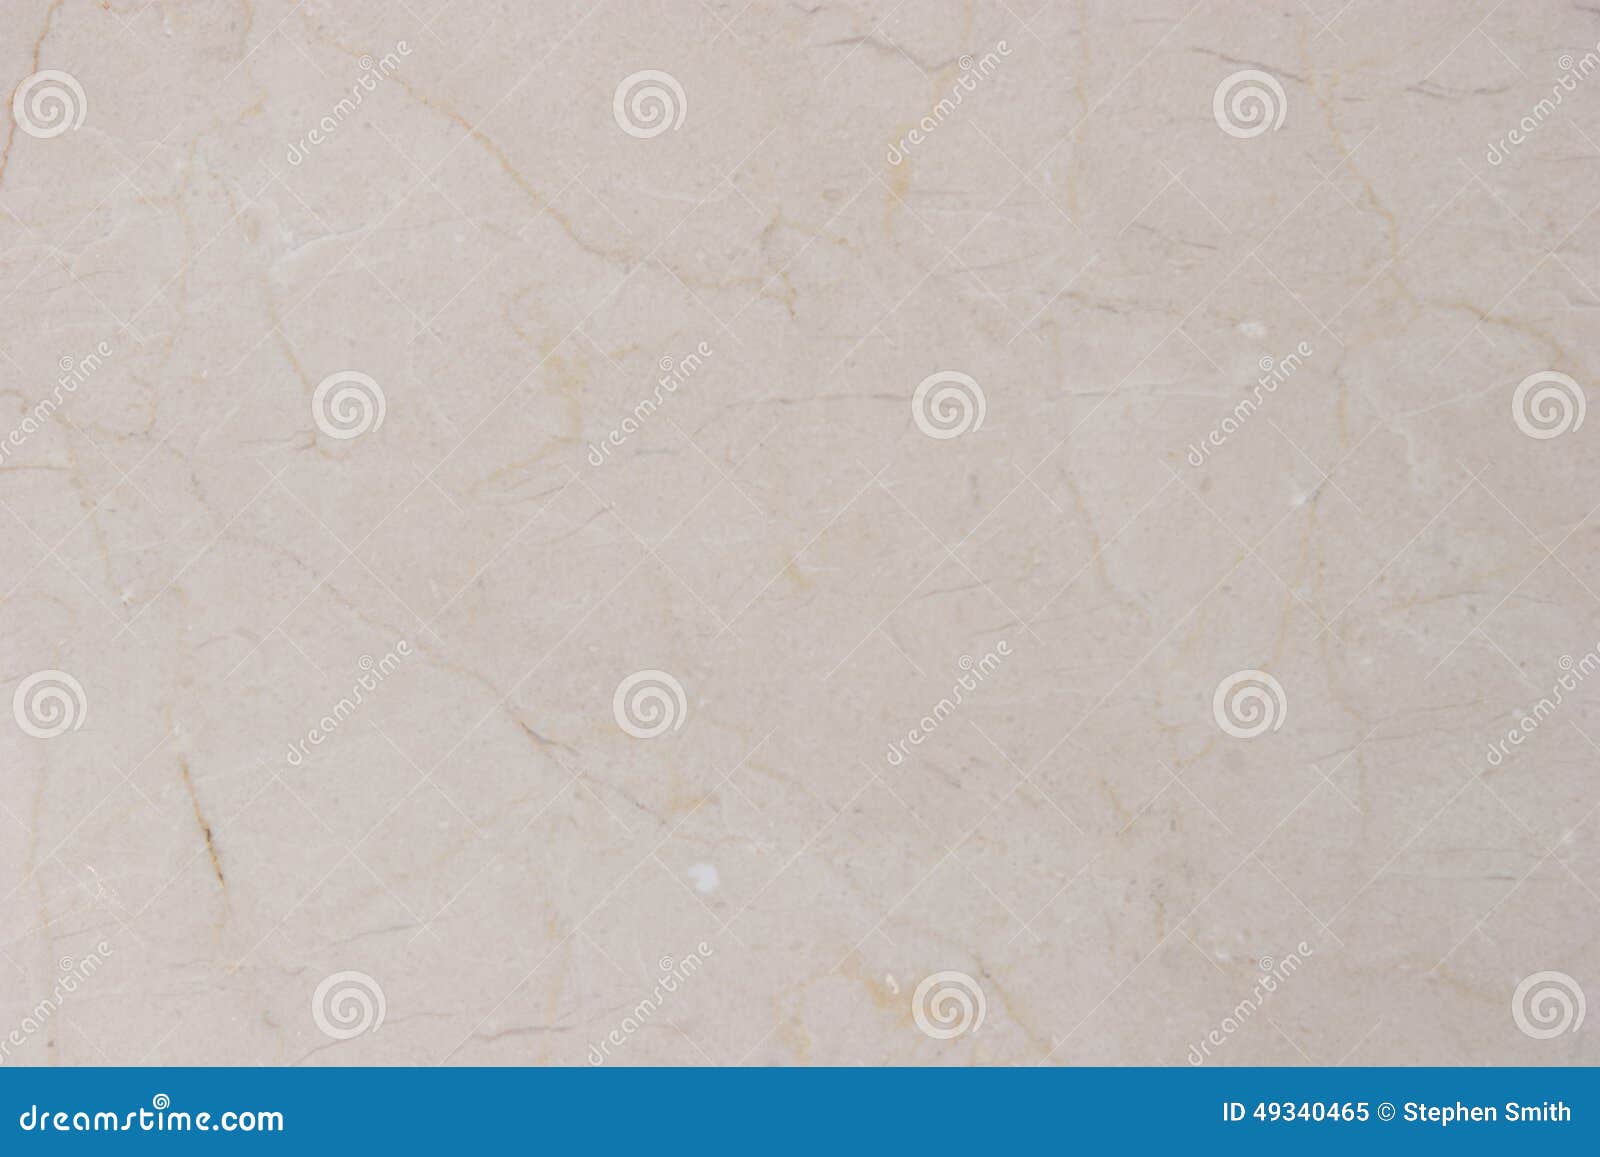 natural stone backgrounds and textures